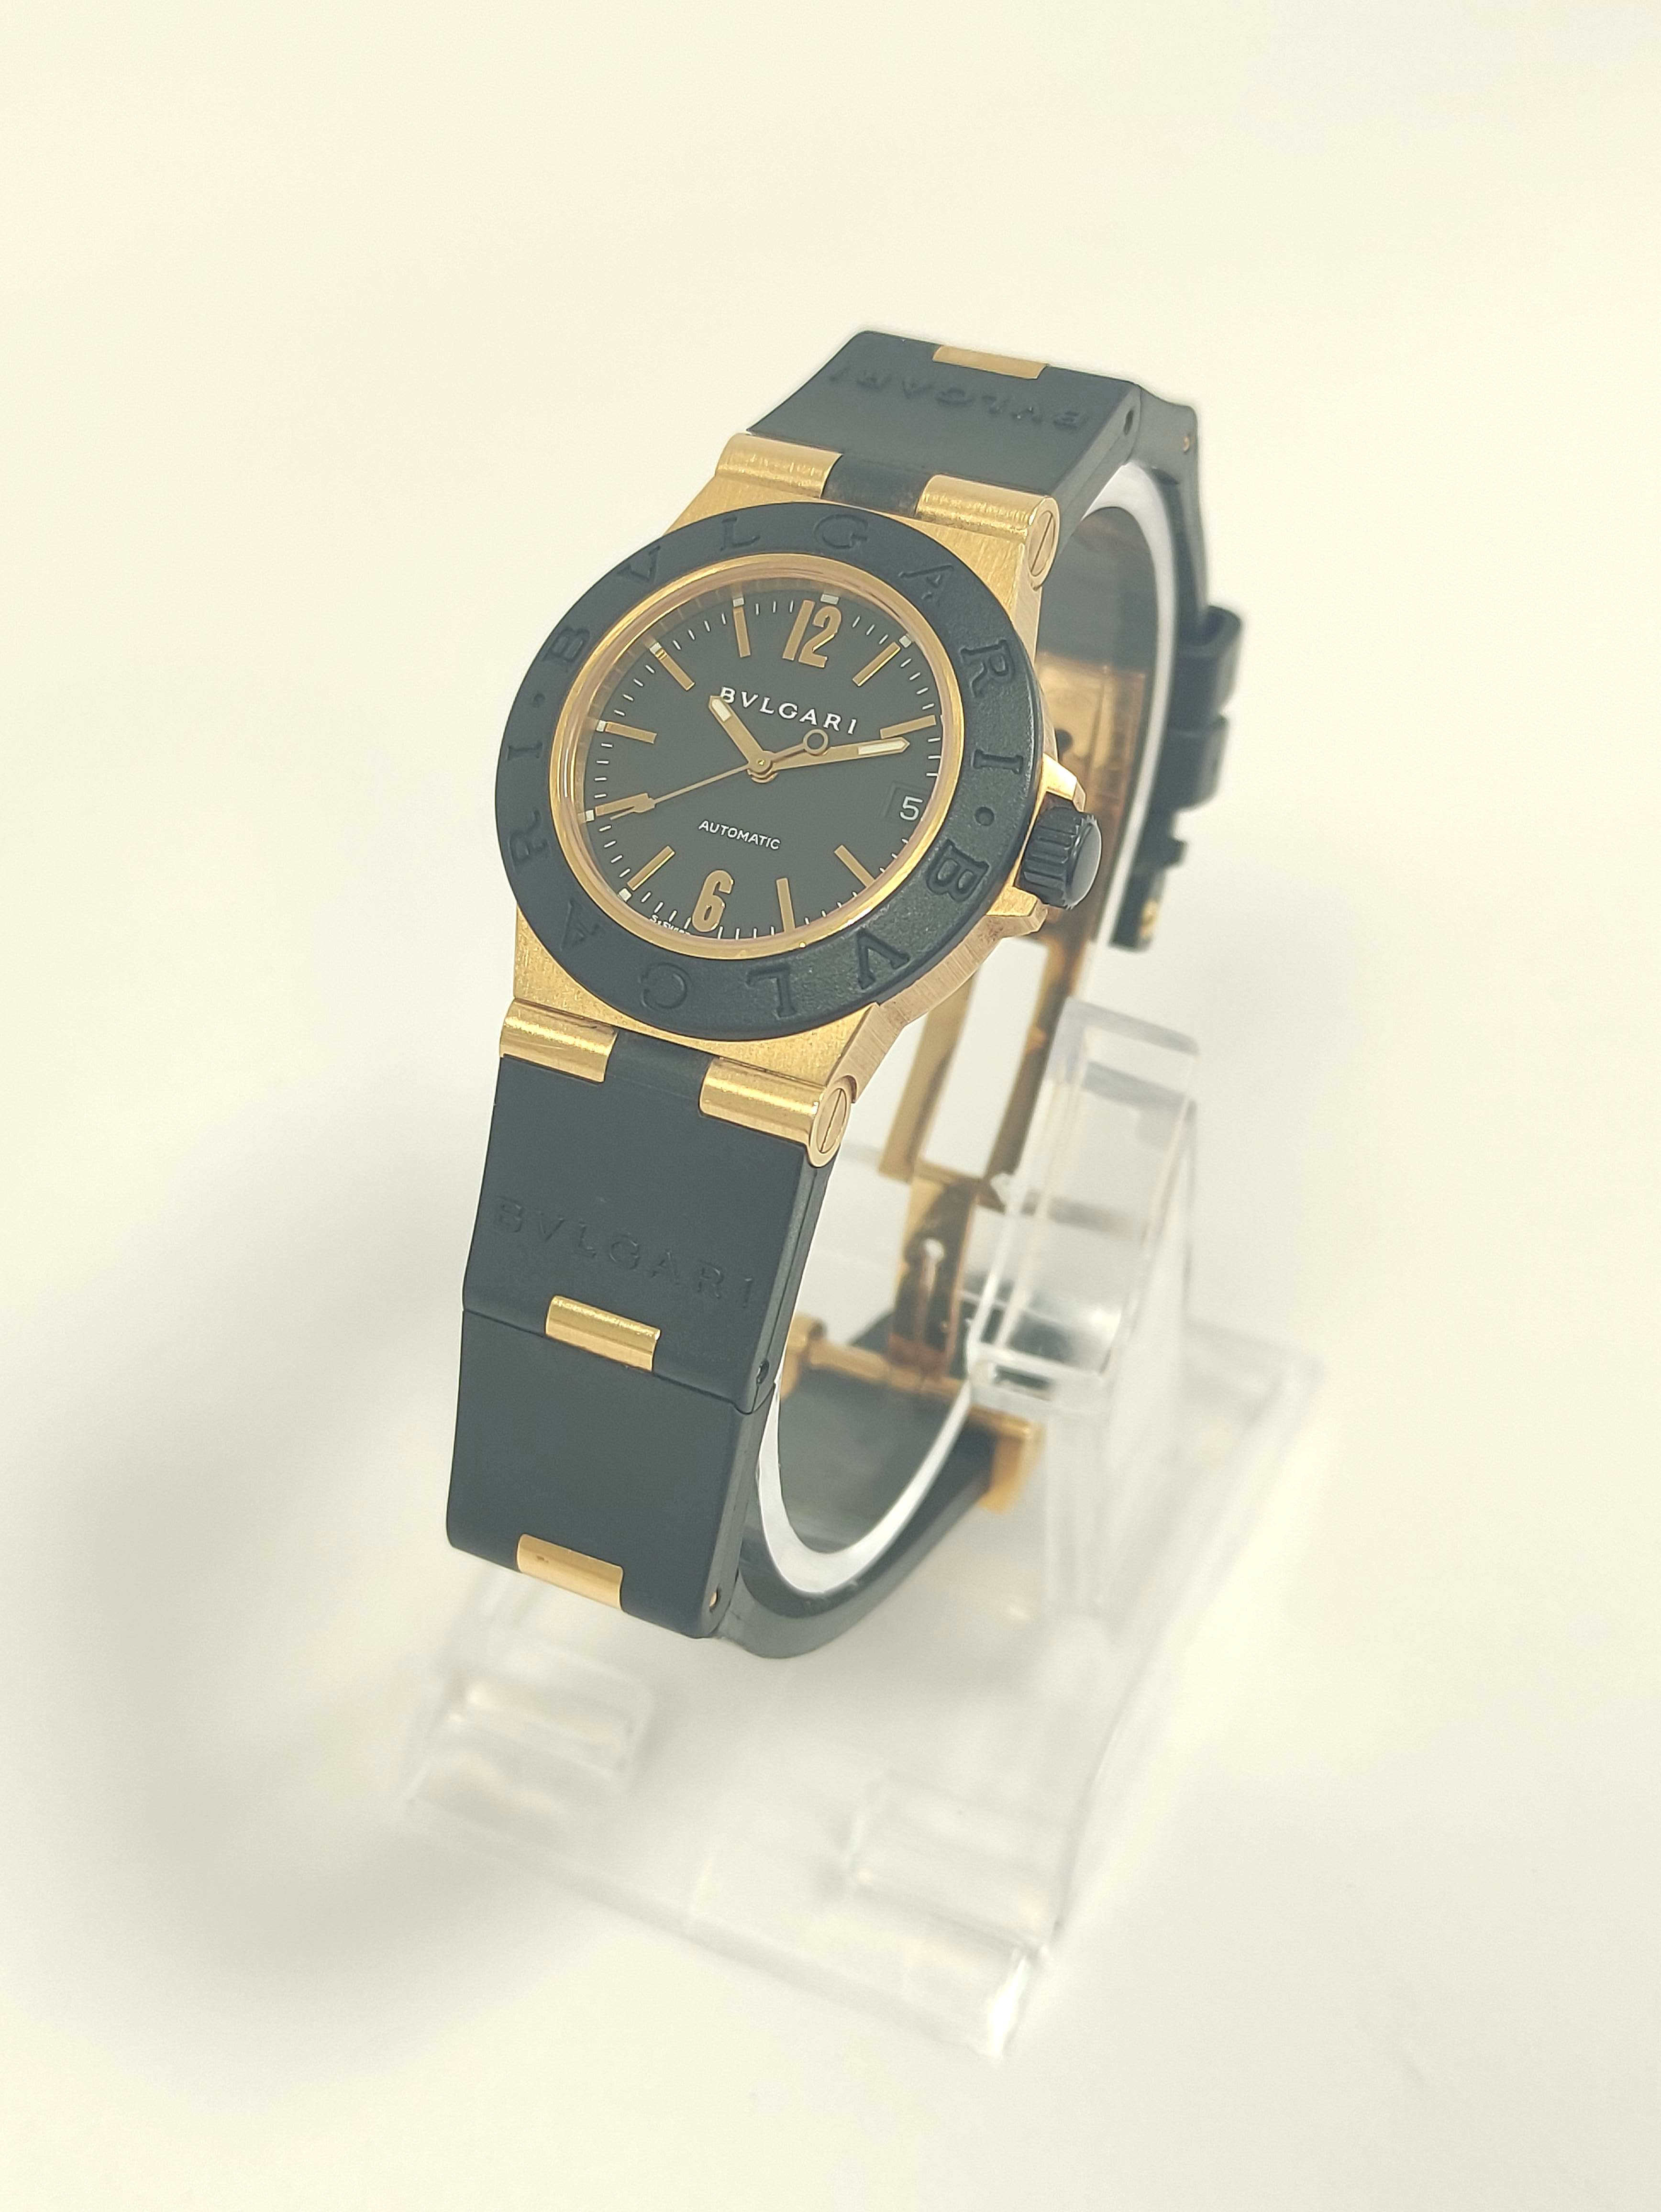 Bulgari AL32 automatic watch, 18ct gold and butyl, with receipt and other items, in box. - Image 3 of 8